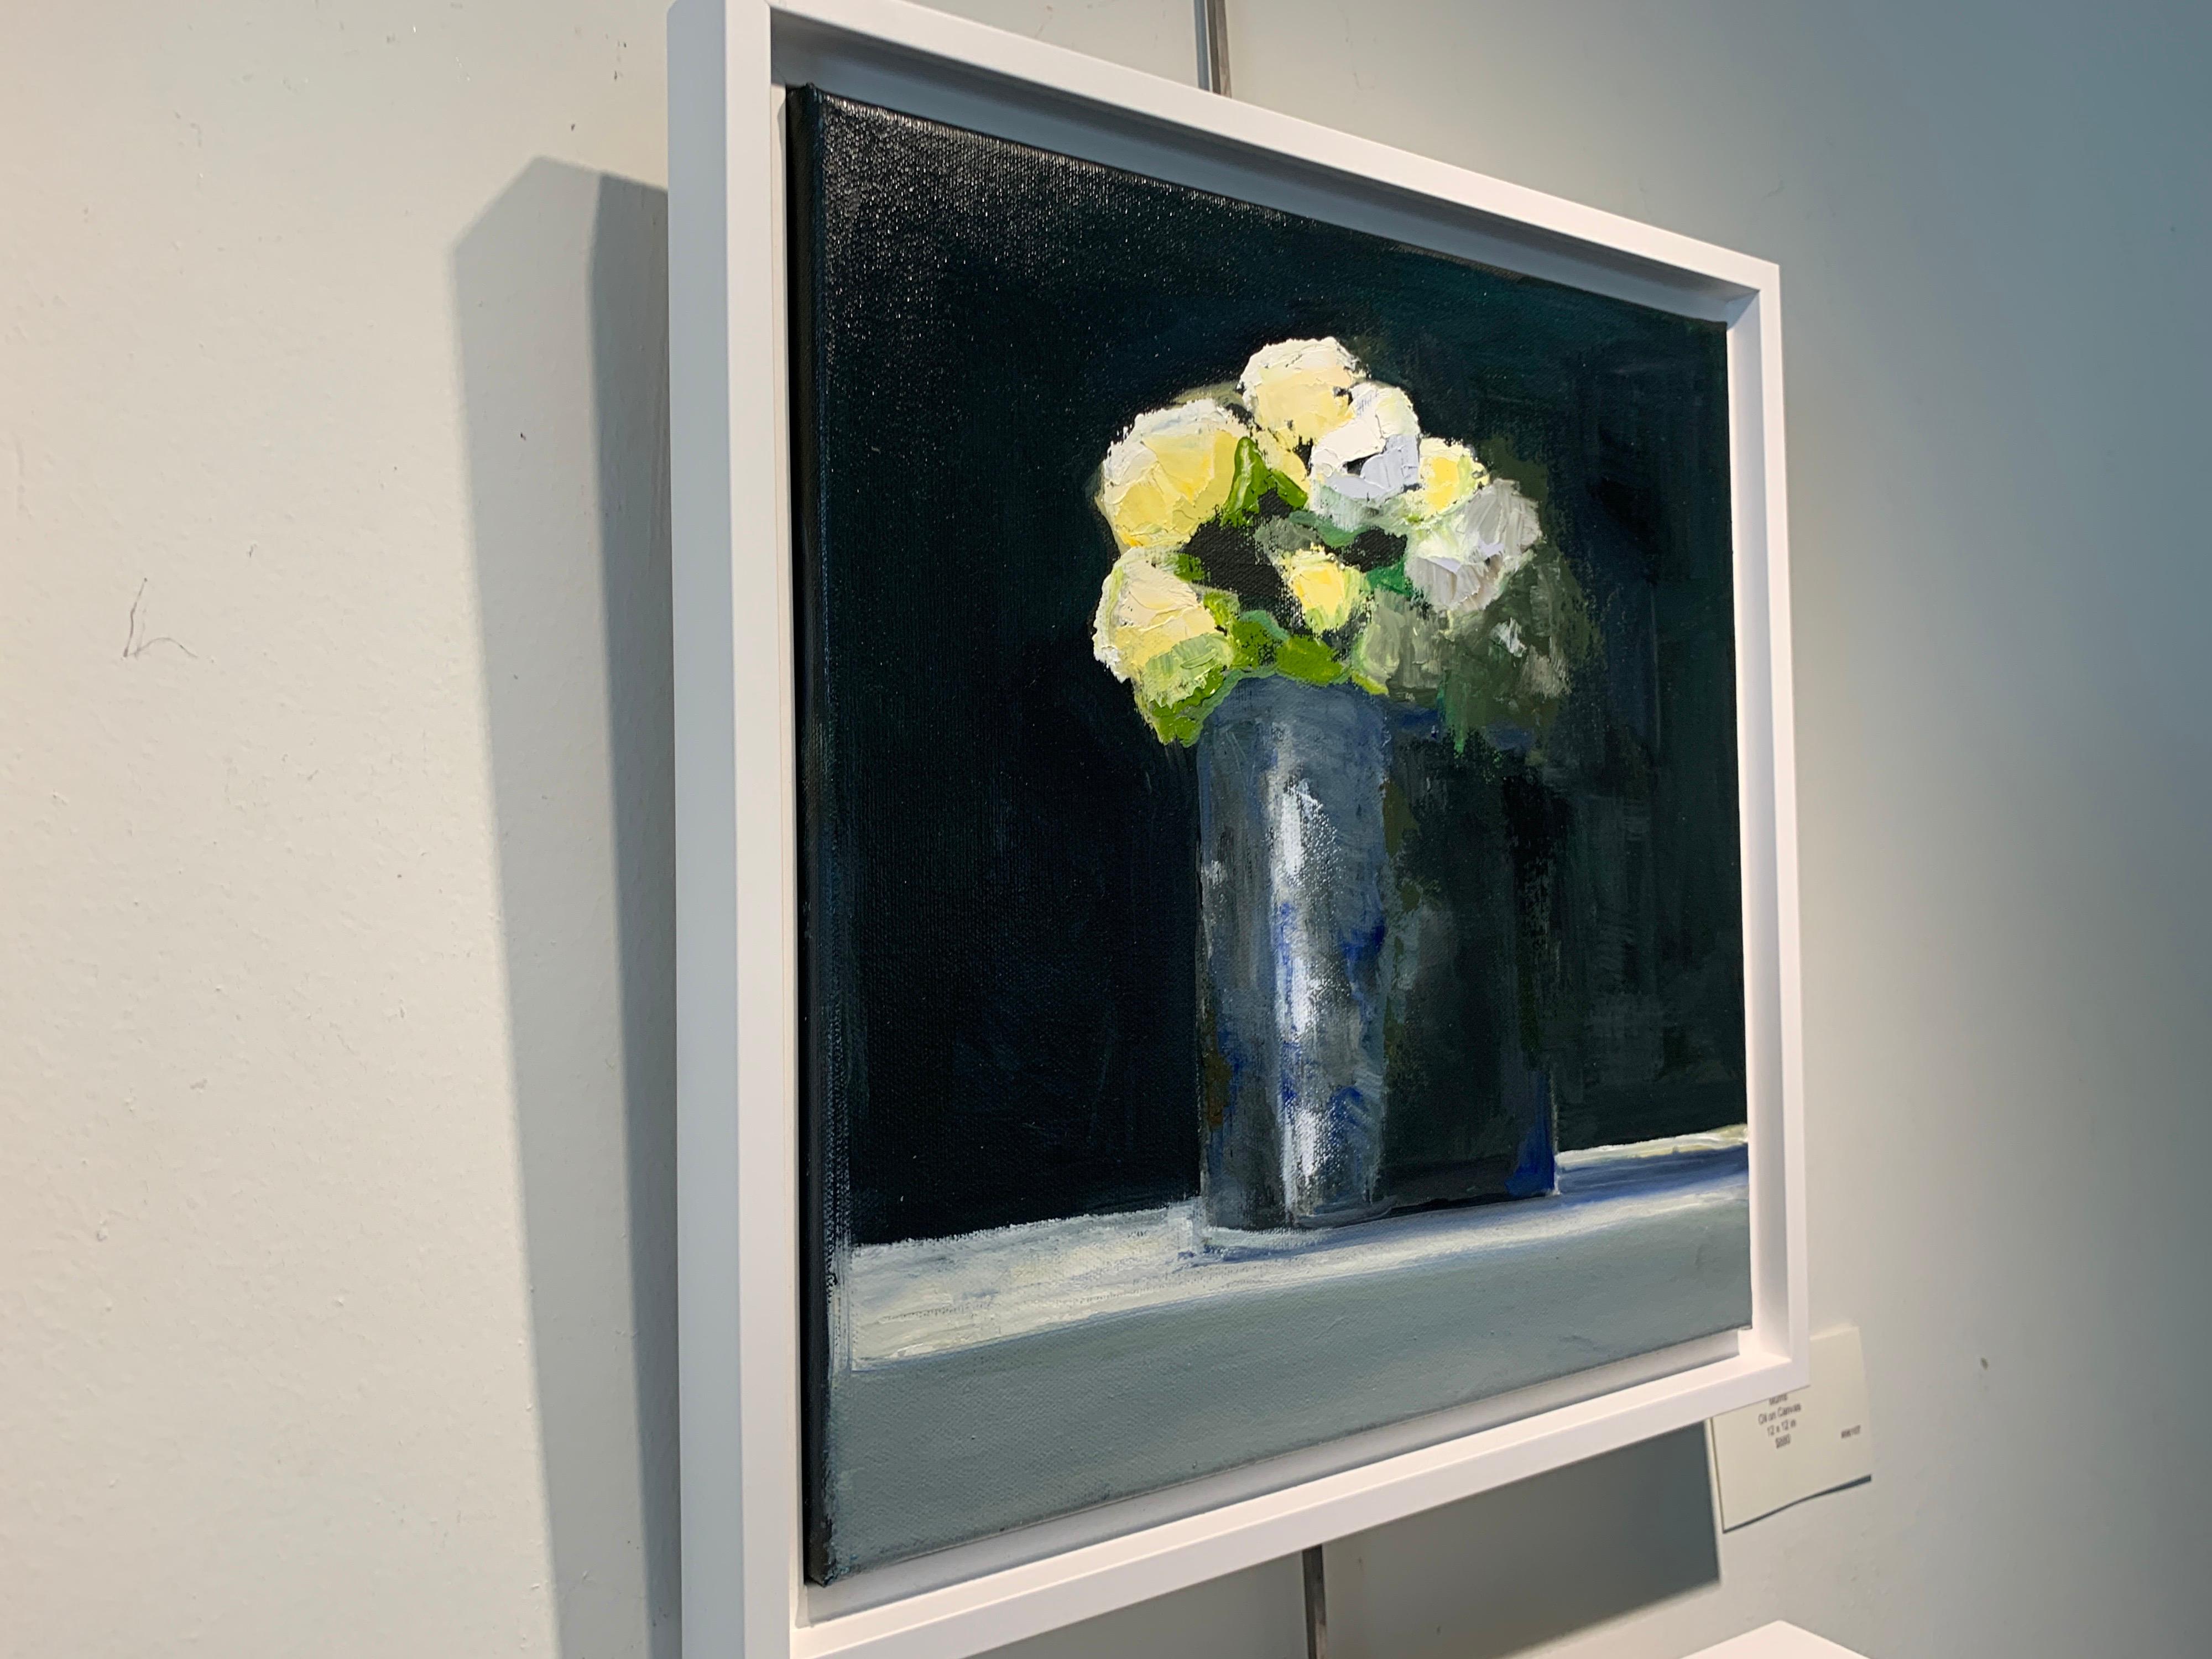 Mums by Anne Harney, Contemporary Floral Still Life Painting 5